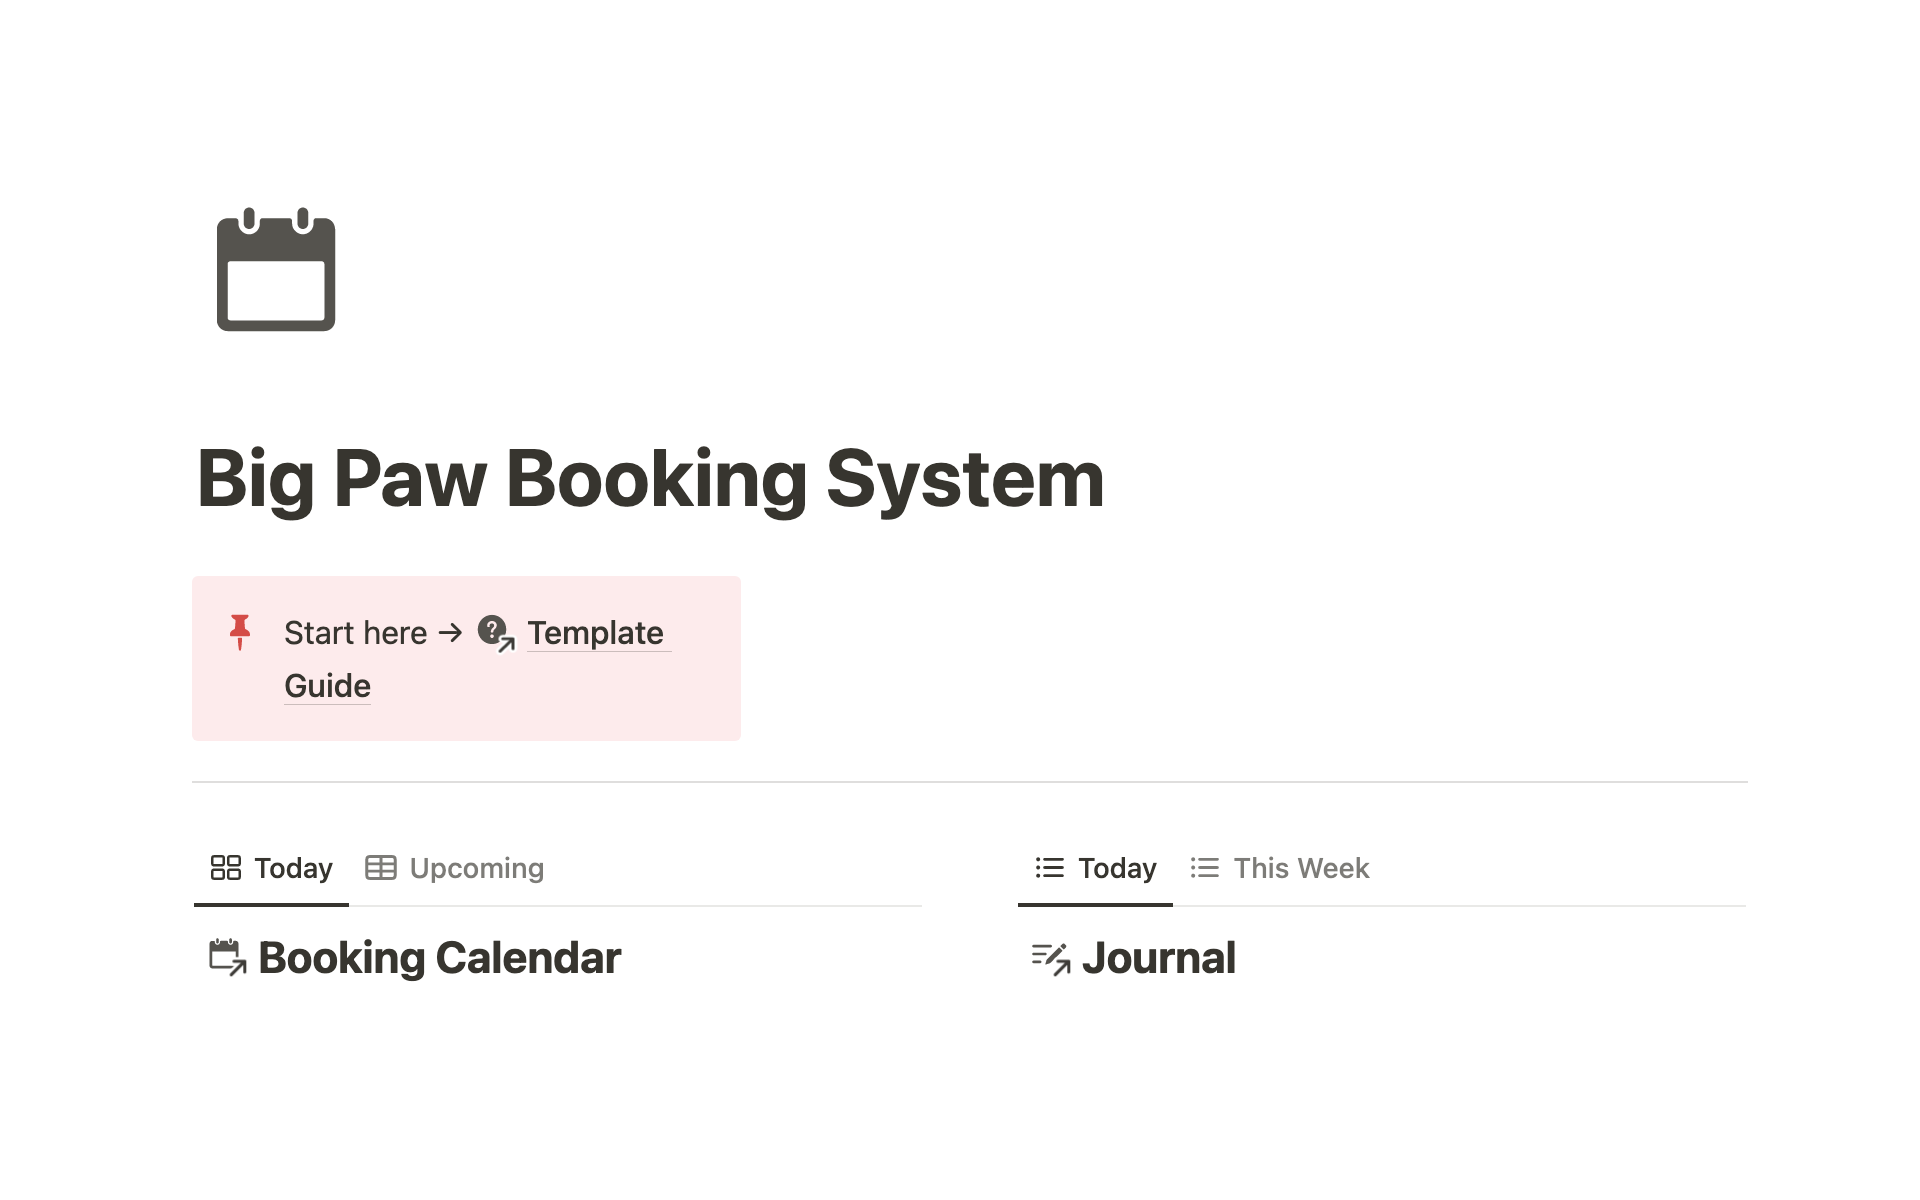 Big Paw is an internal booking system for pet care professionals and facilities.